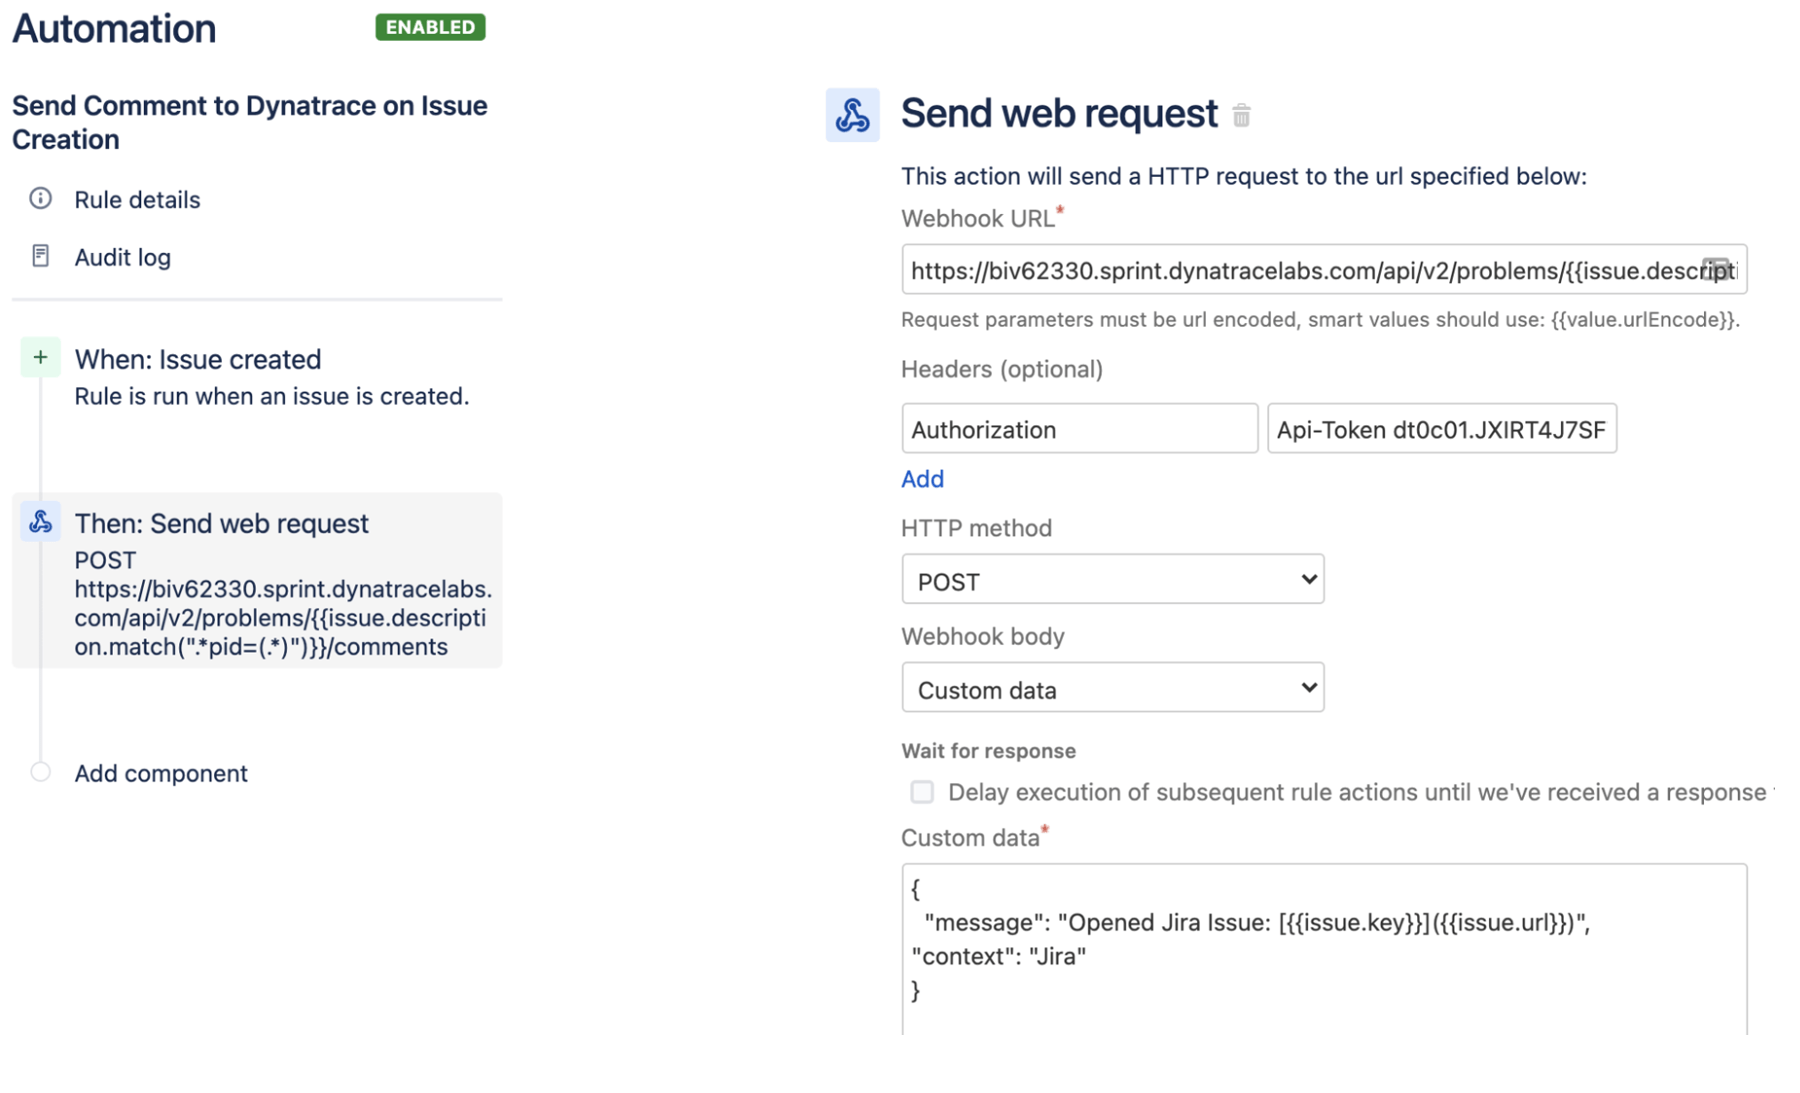 Send web request with comment